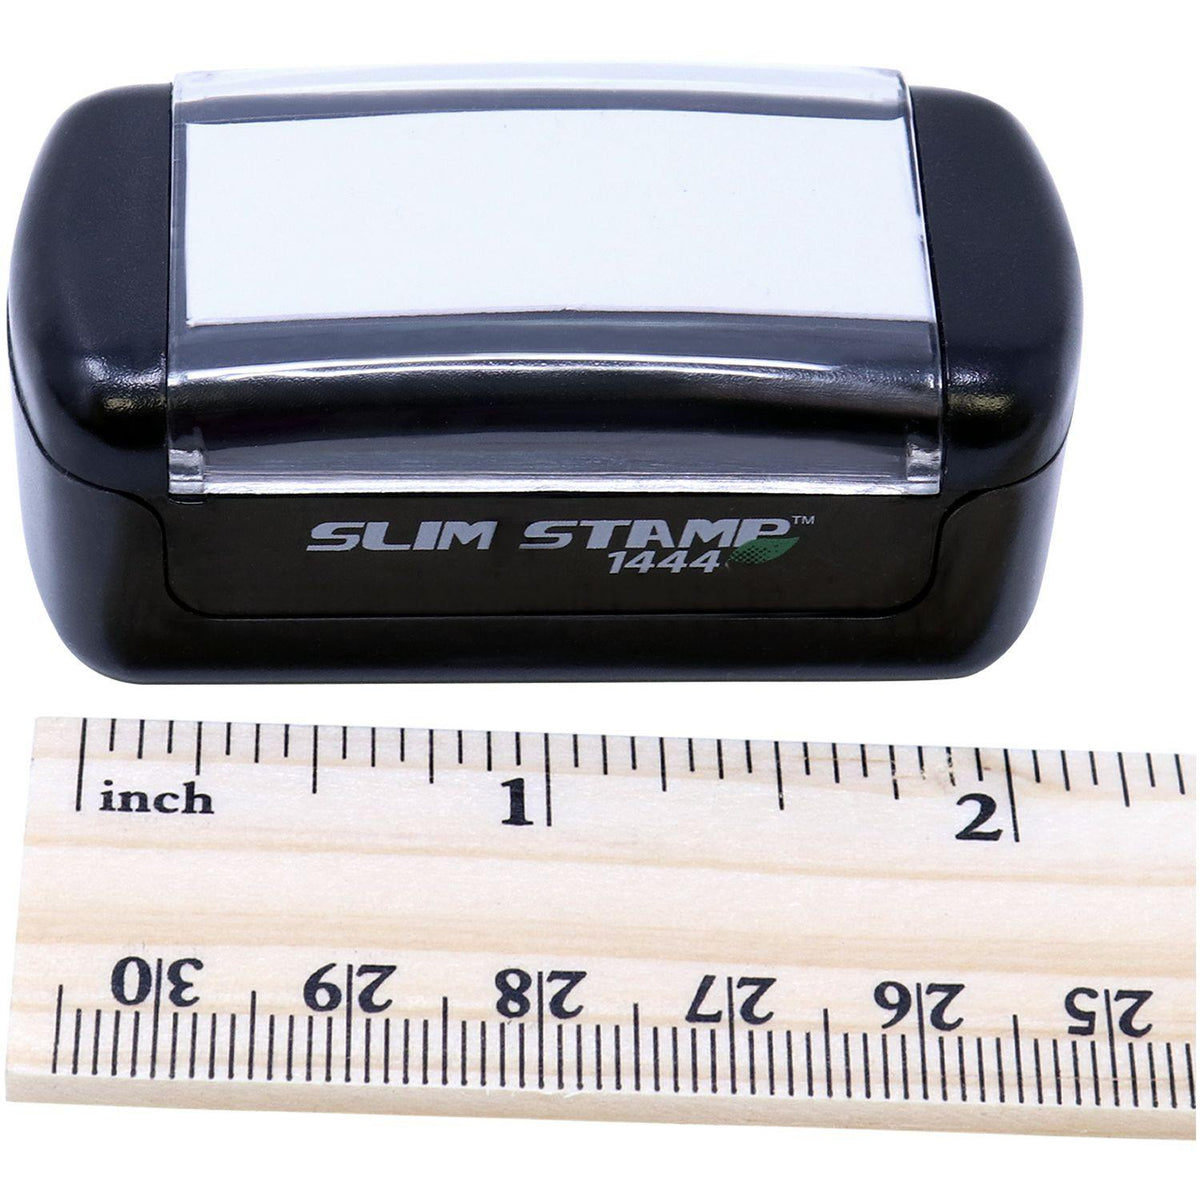 Measurement Slim Pre-Inked Spoiled Stamp with Ruler